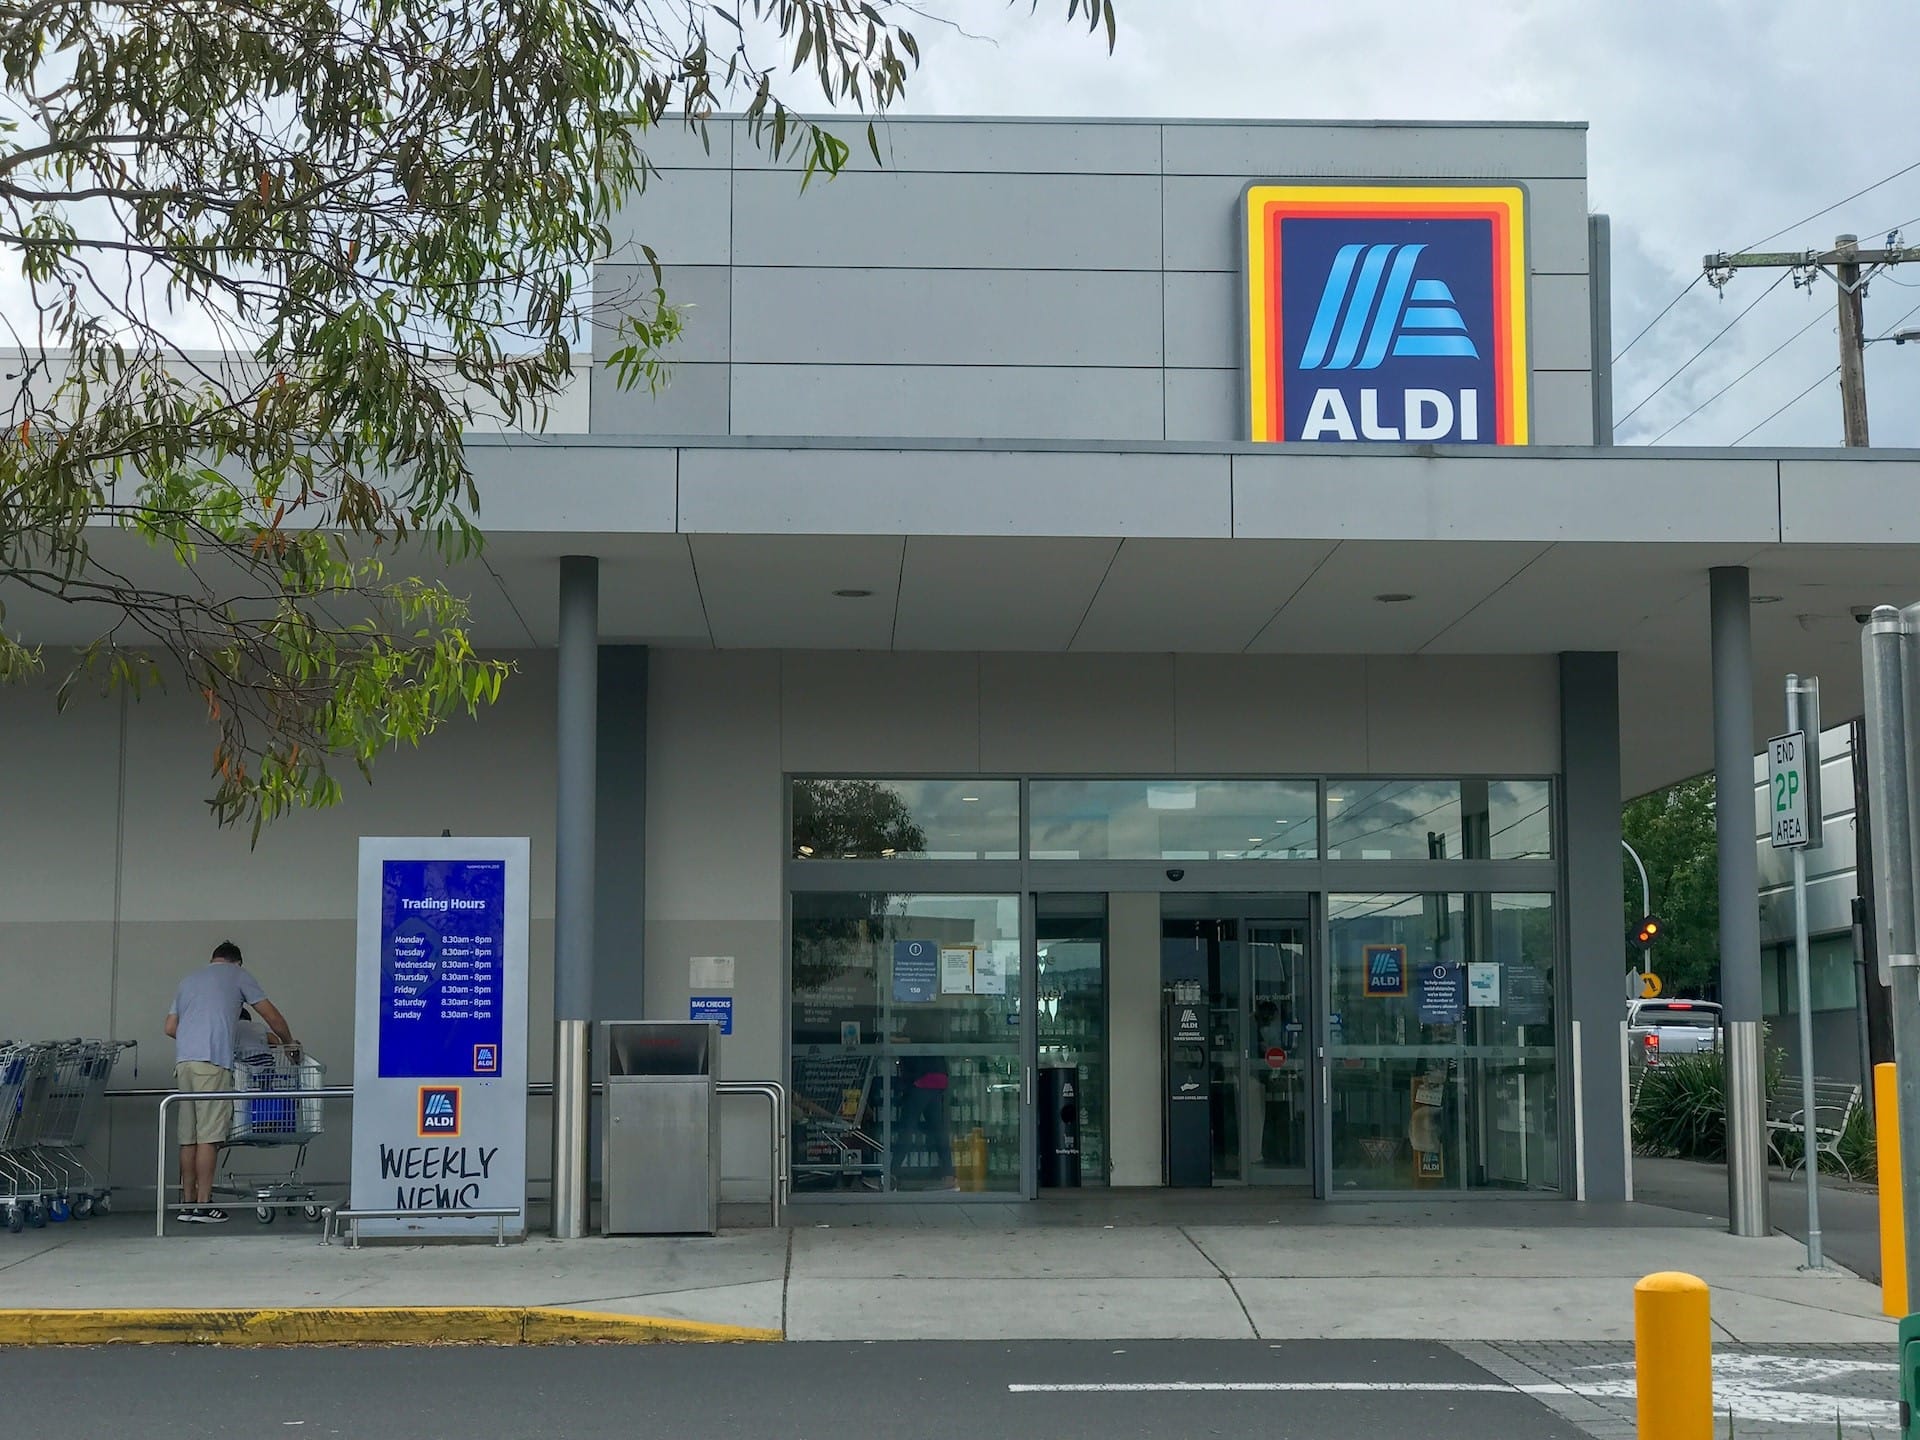 ALDI Business Model Featured Image by Marques Thomas